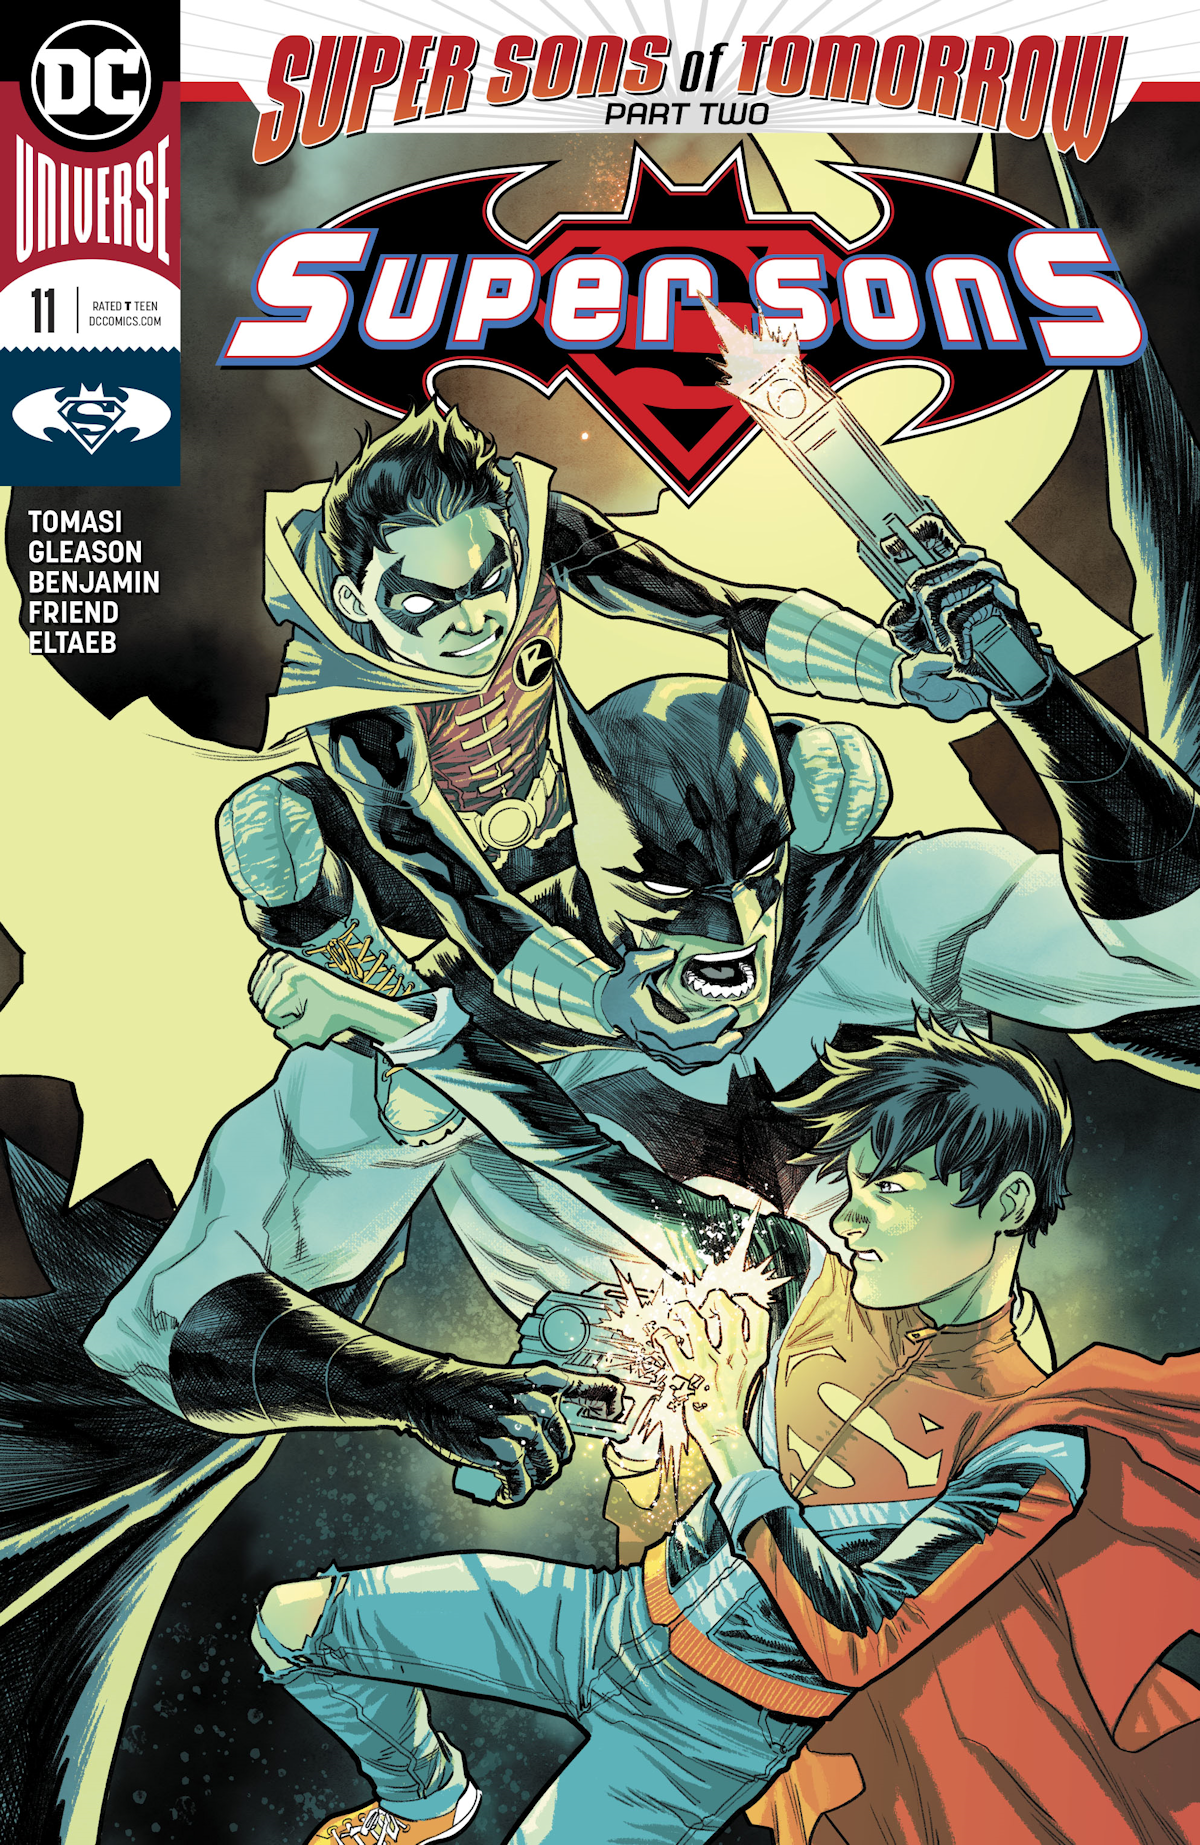 Super Sons 11 (Cover A)